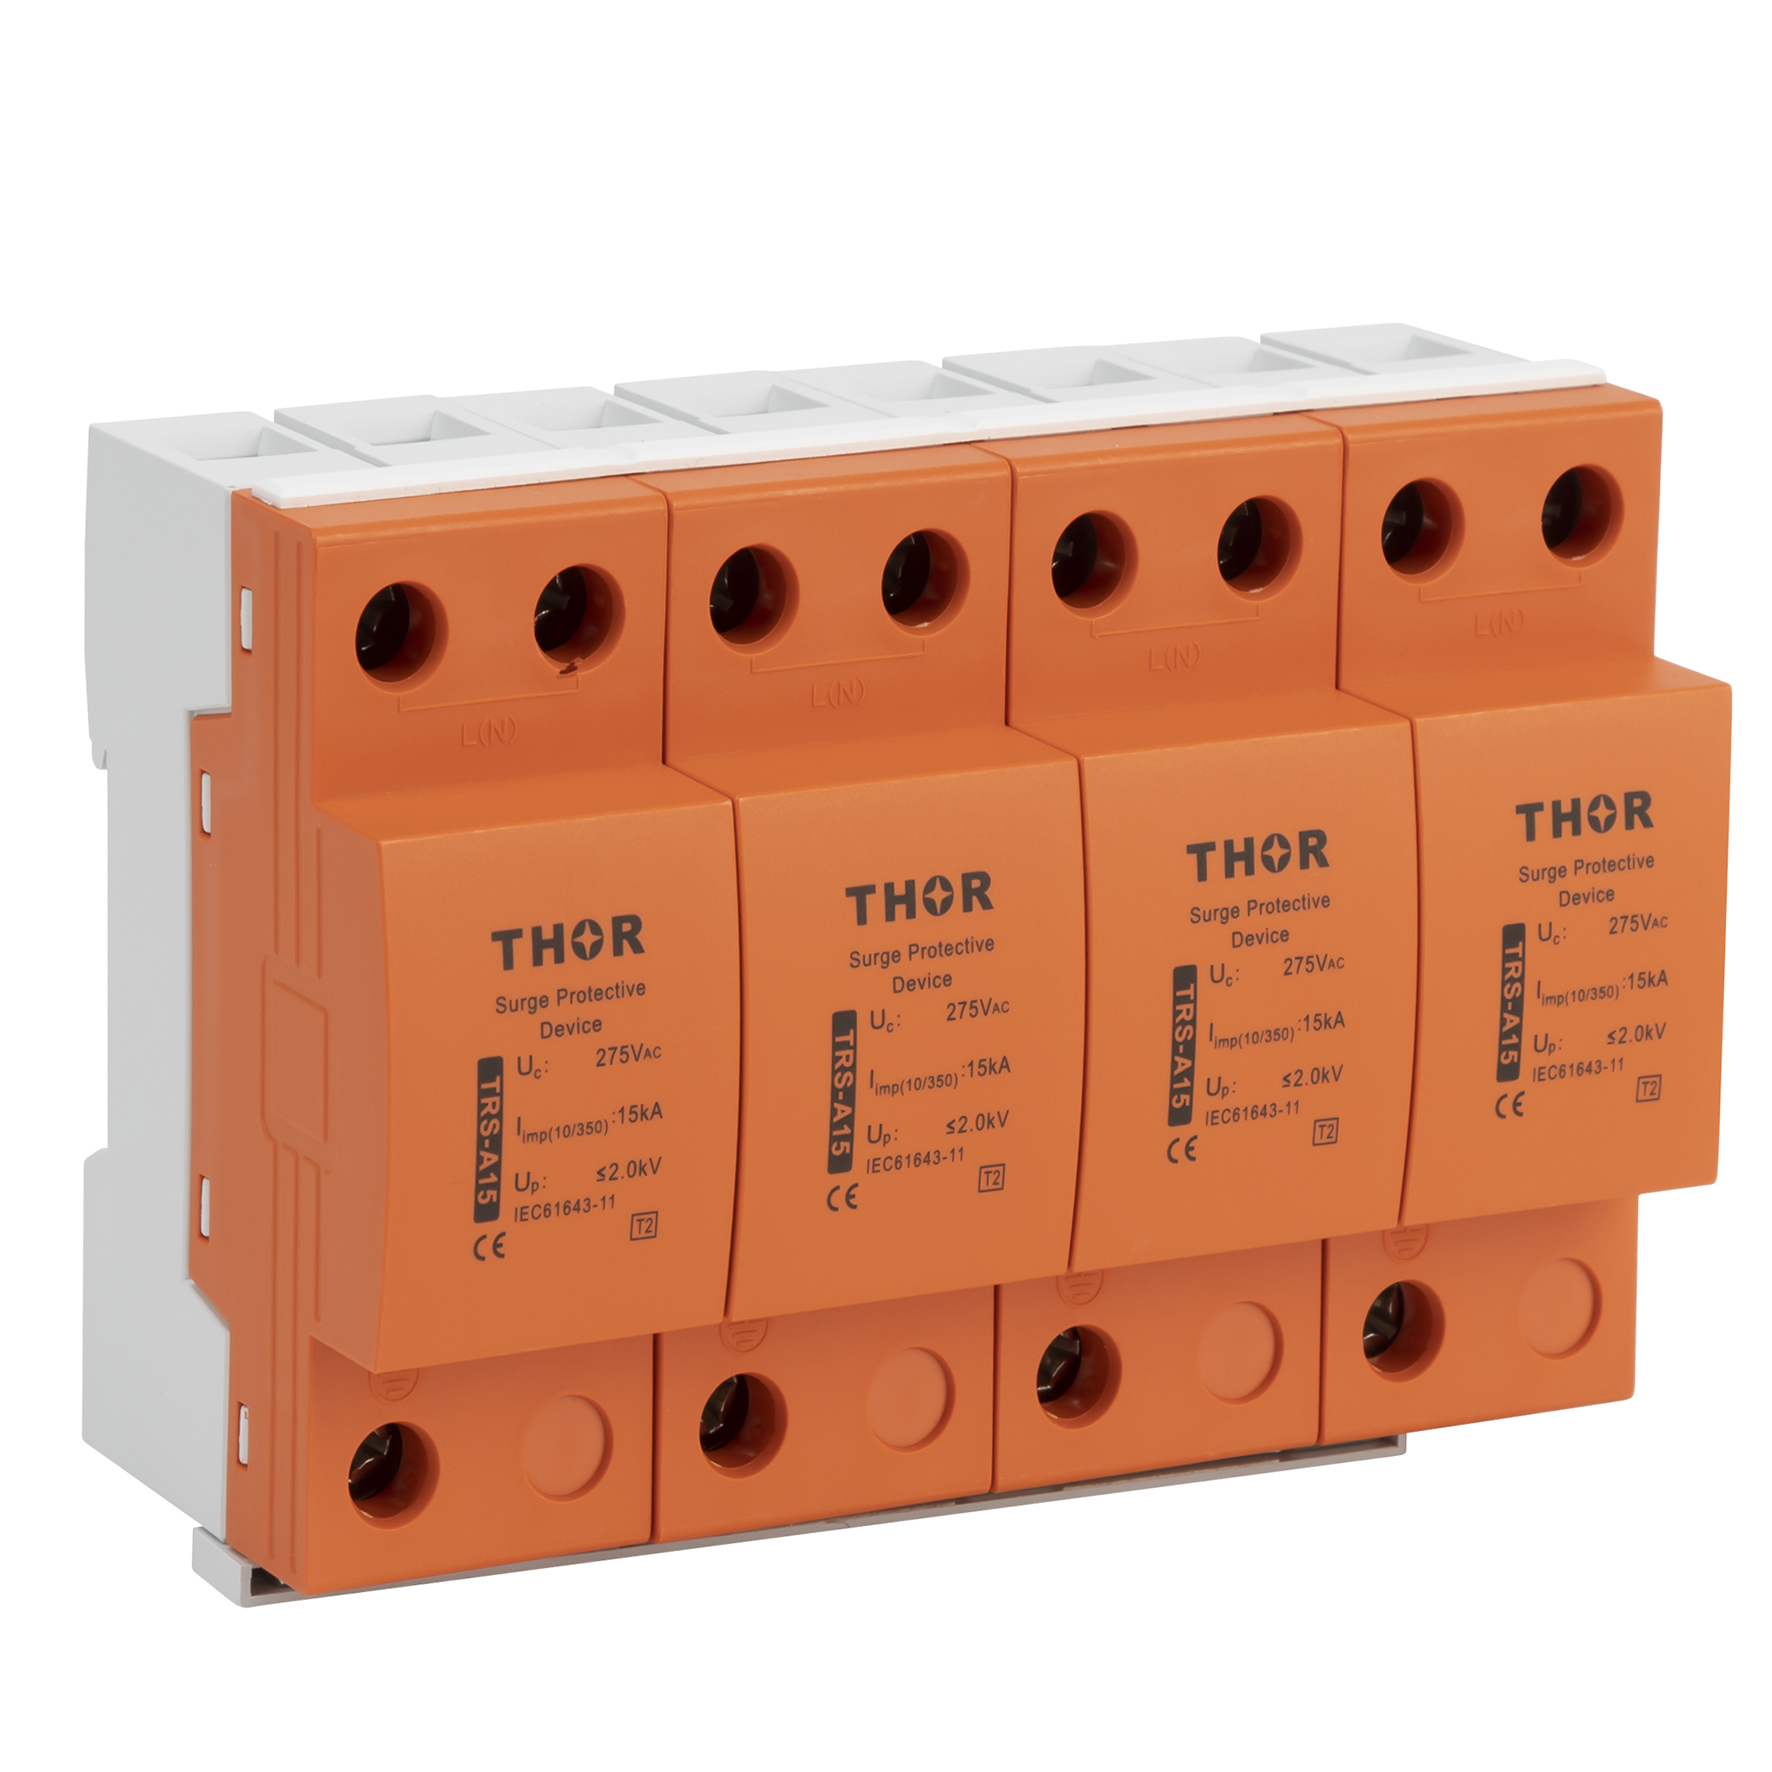 lightning protection,power surge protector,surge protection device,surge protector,spd,surge protection